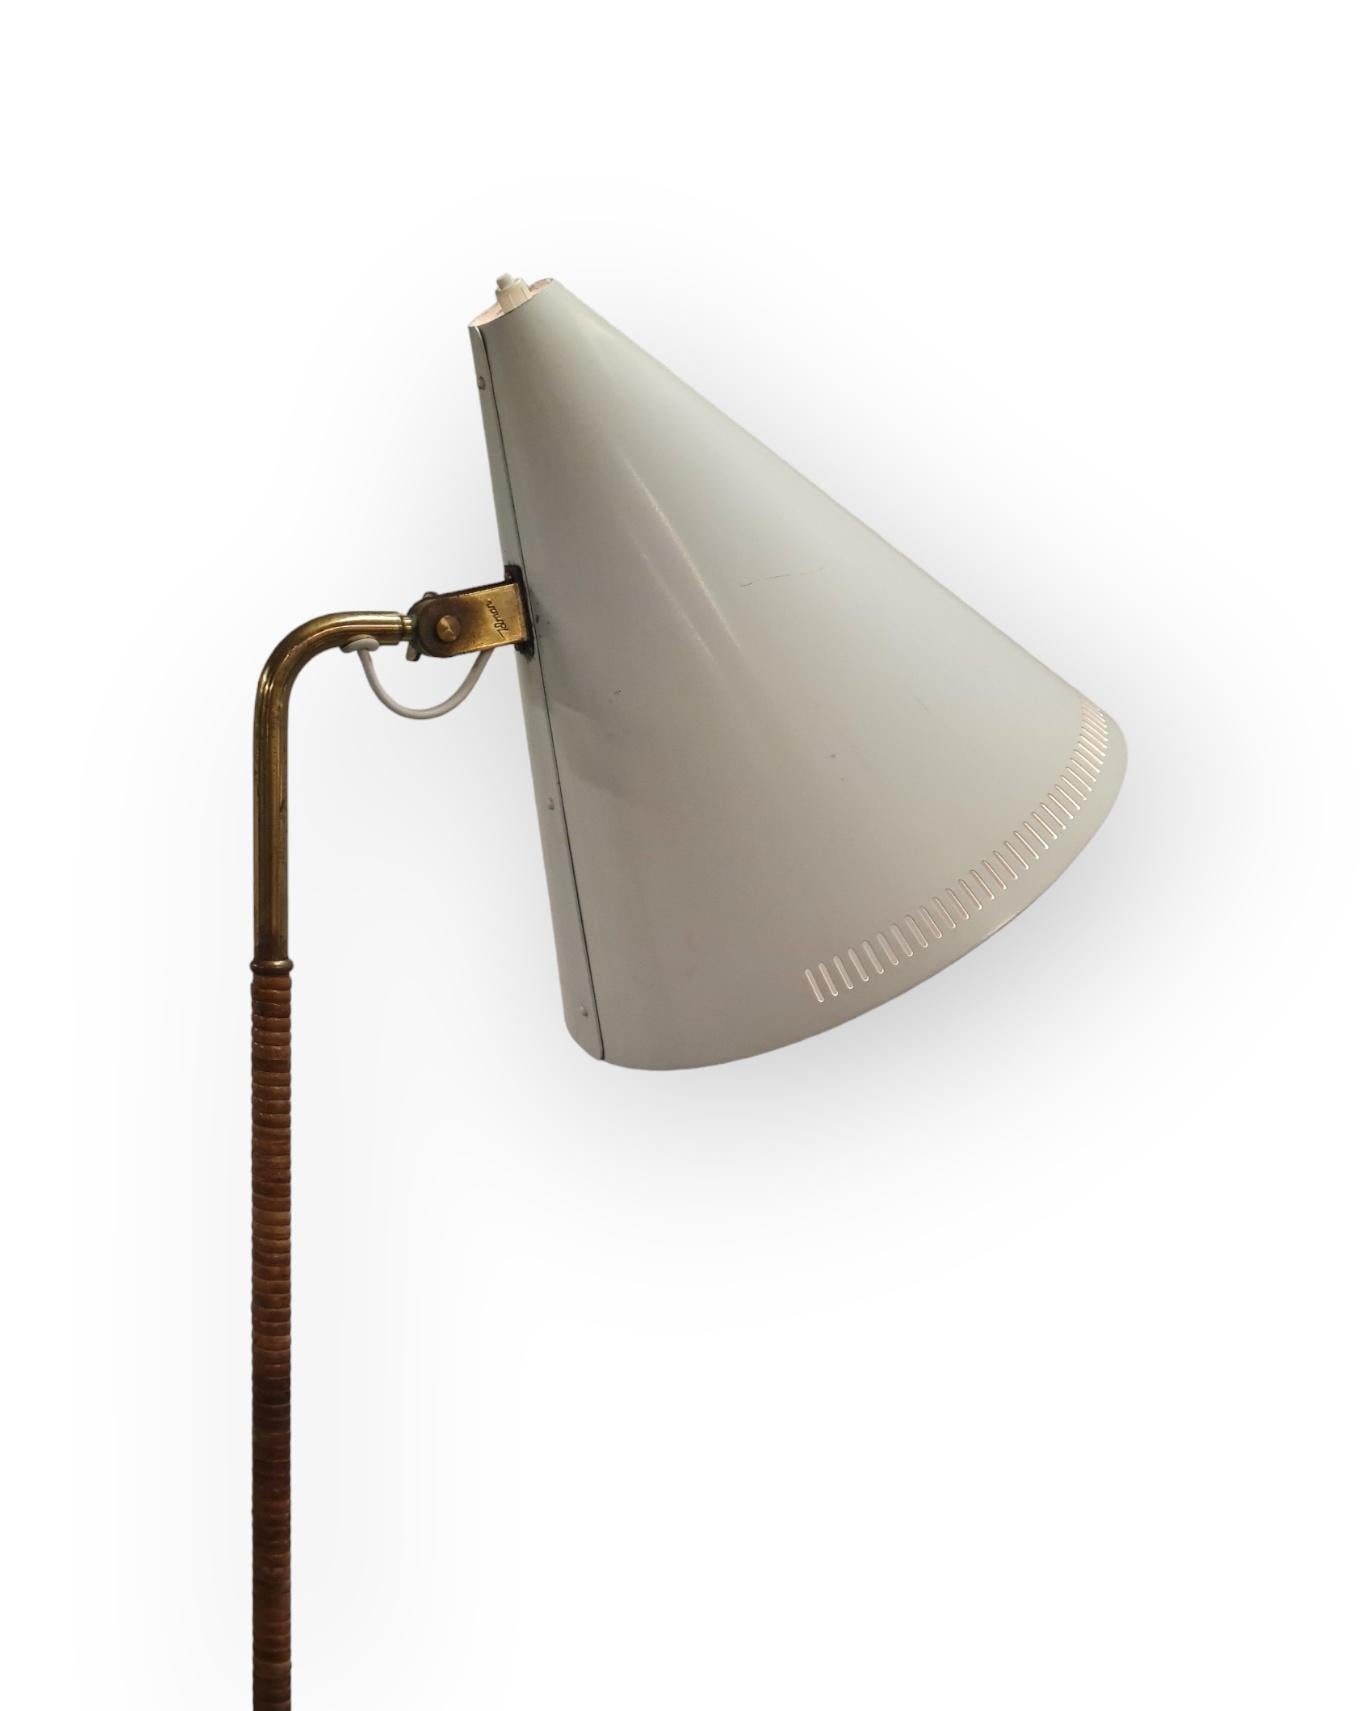 An iconic floor lamp model designed by Paavo Tynell himself for Idman in the 1950s. The lamp has sustained its original condition and glory and has an Idman stamp. The lamp has it's own nickname as the 